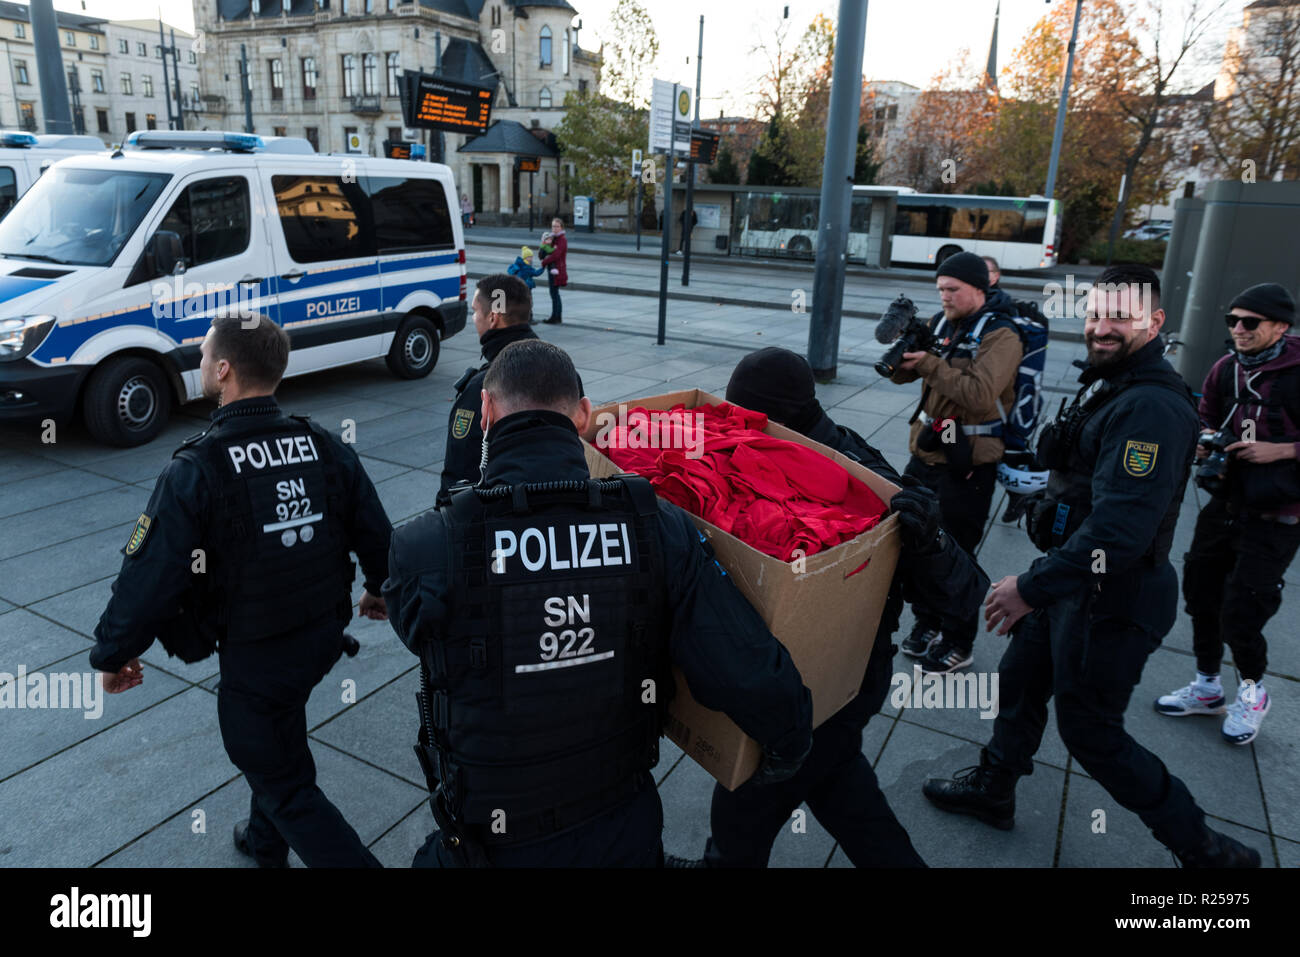 Policemen seen taking away confiscated T-shirts during the right-wing protest. Right-wing protests against Merkel's visit to Chemnitz, Deutschland. The Chancellor visited the city and talked to the citizens in a citizens' forum after protests and riots broke out in August after a violent death of a 35-year-old man from Chemnitz. Stock Photo